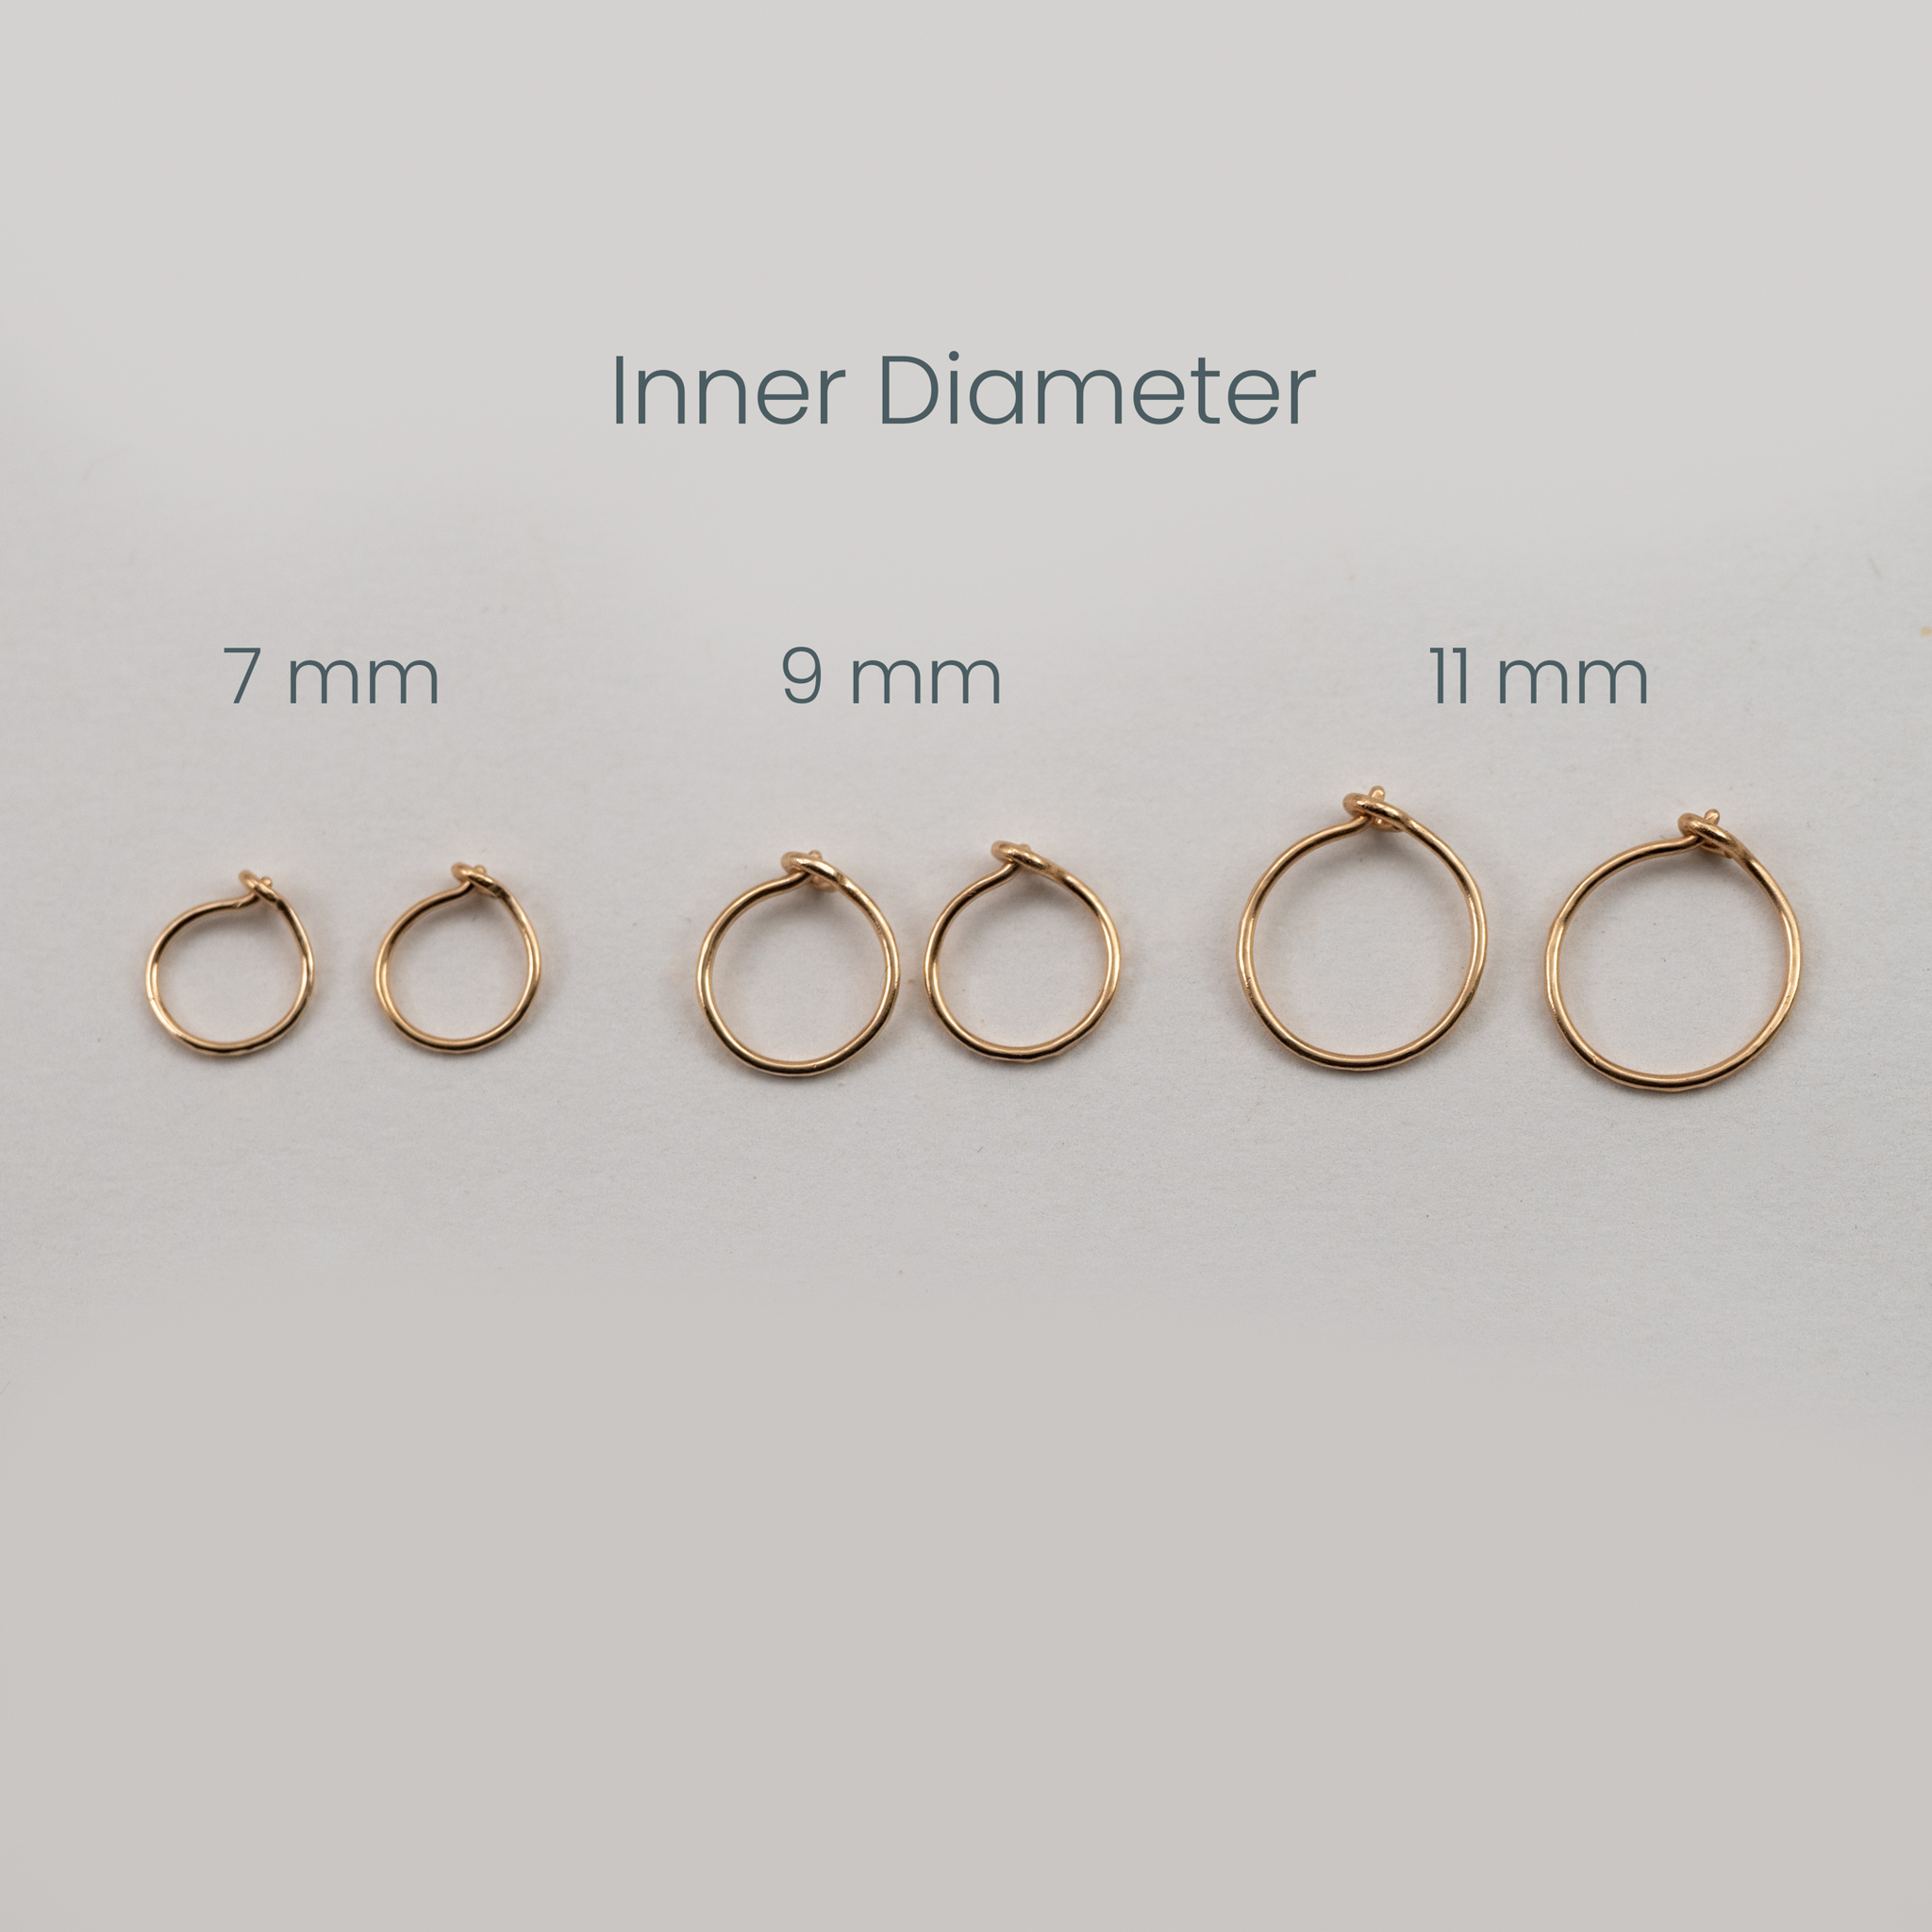 18K Mini Hoops Recycled Gold